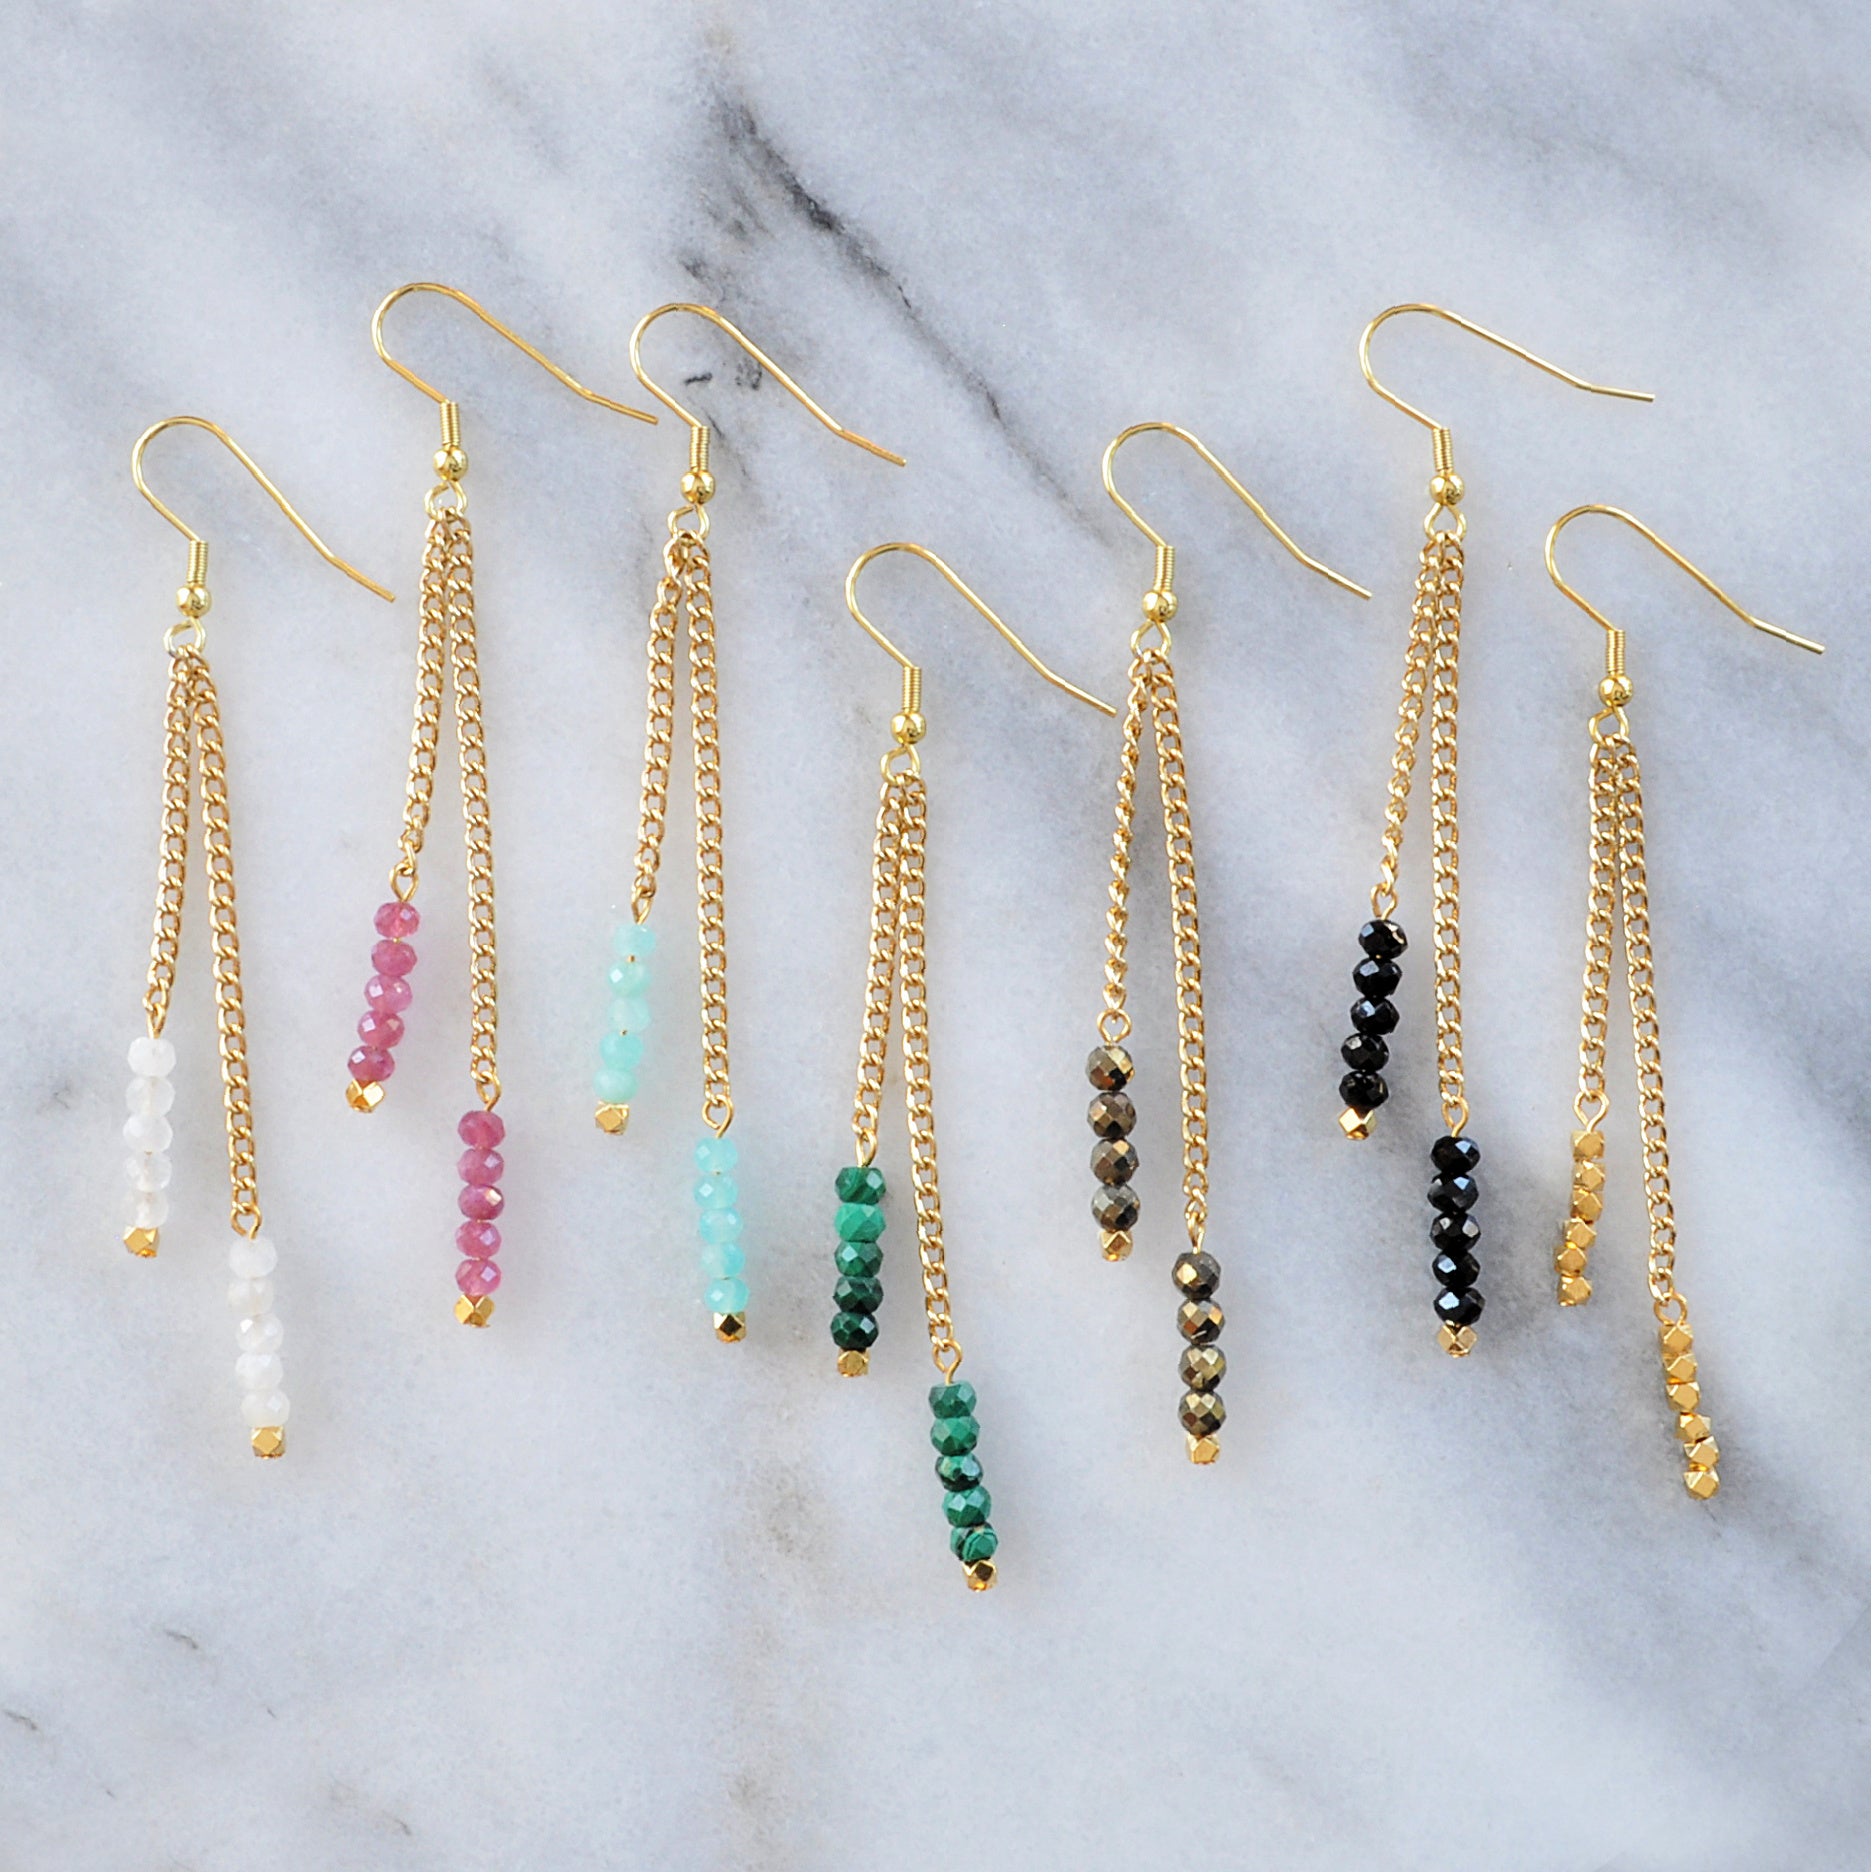 Libby & Smee Gemstone Gold chain Earrings available with Moonstone, Pink Tourmaline, Amazonite, Malachite, Pyrite, Black Spinel and Gold Beads